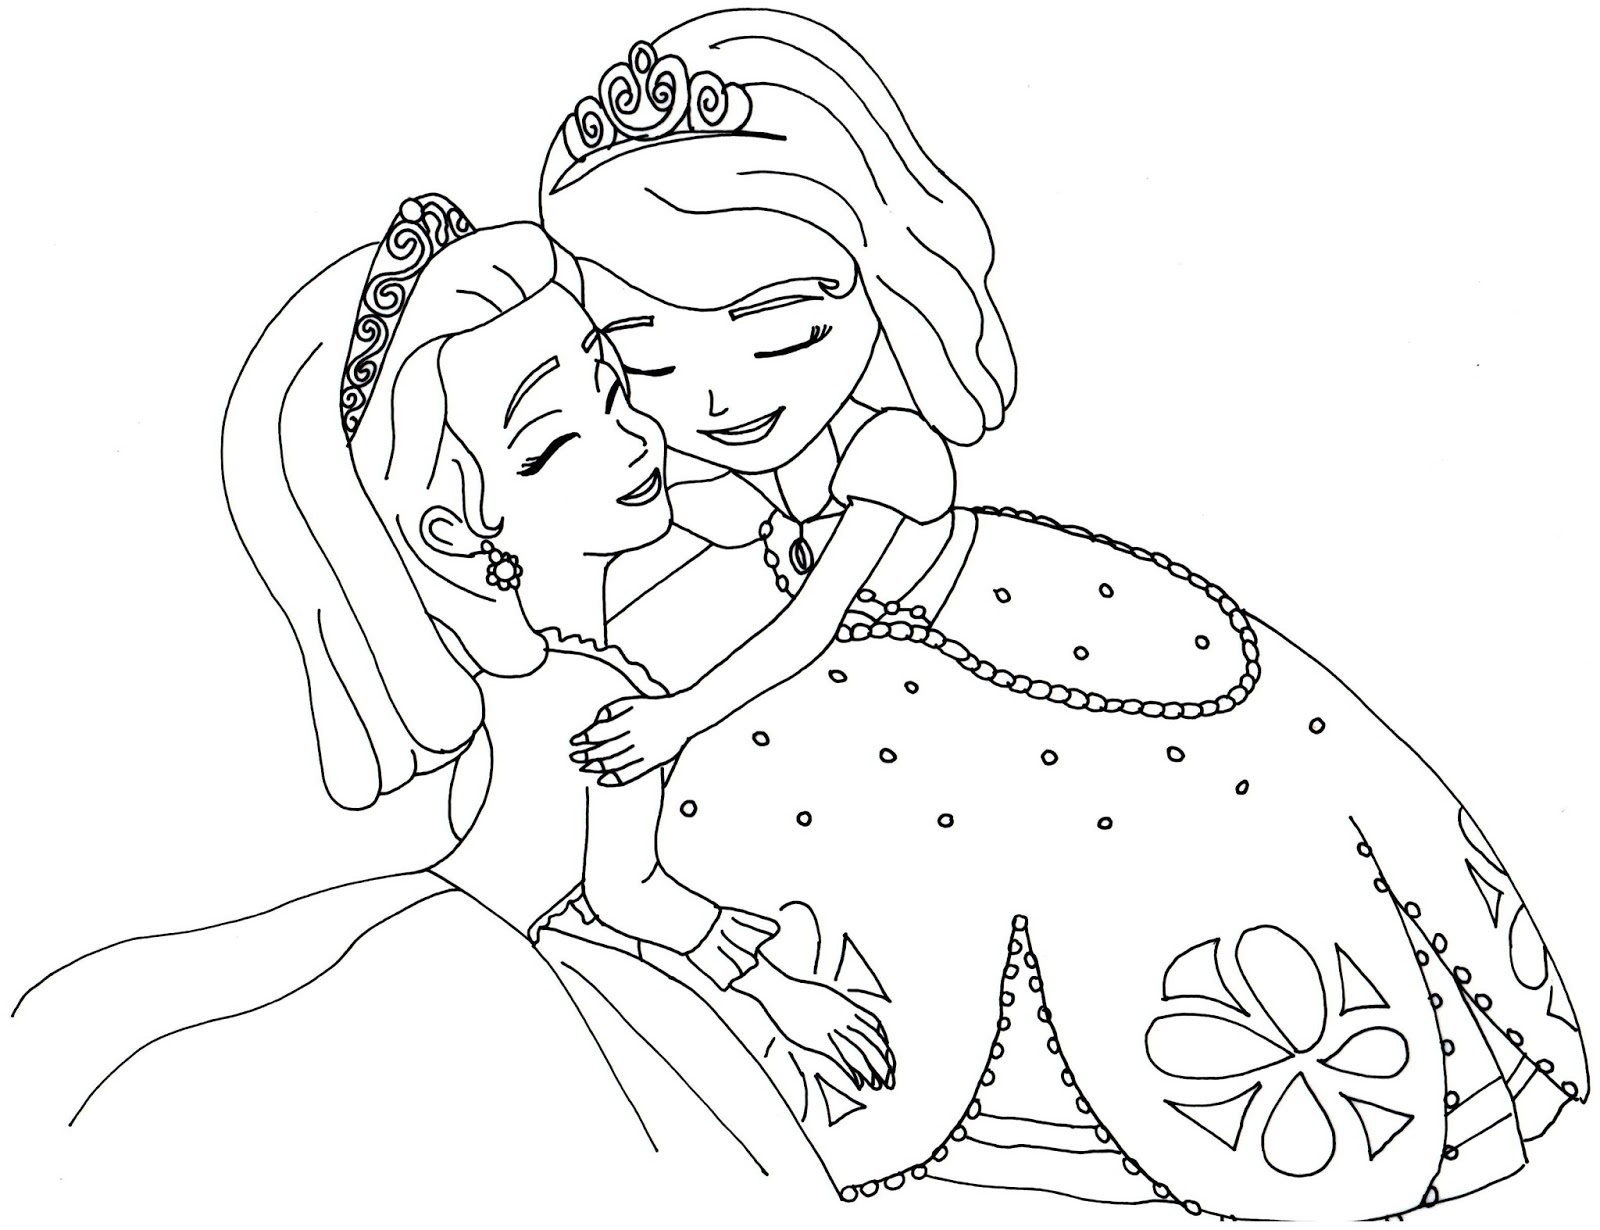 Sofia The First Coloring Pages: Sofia and Amber Hugged - Free Coloring Page